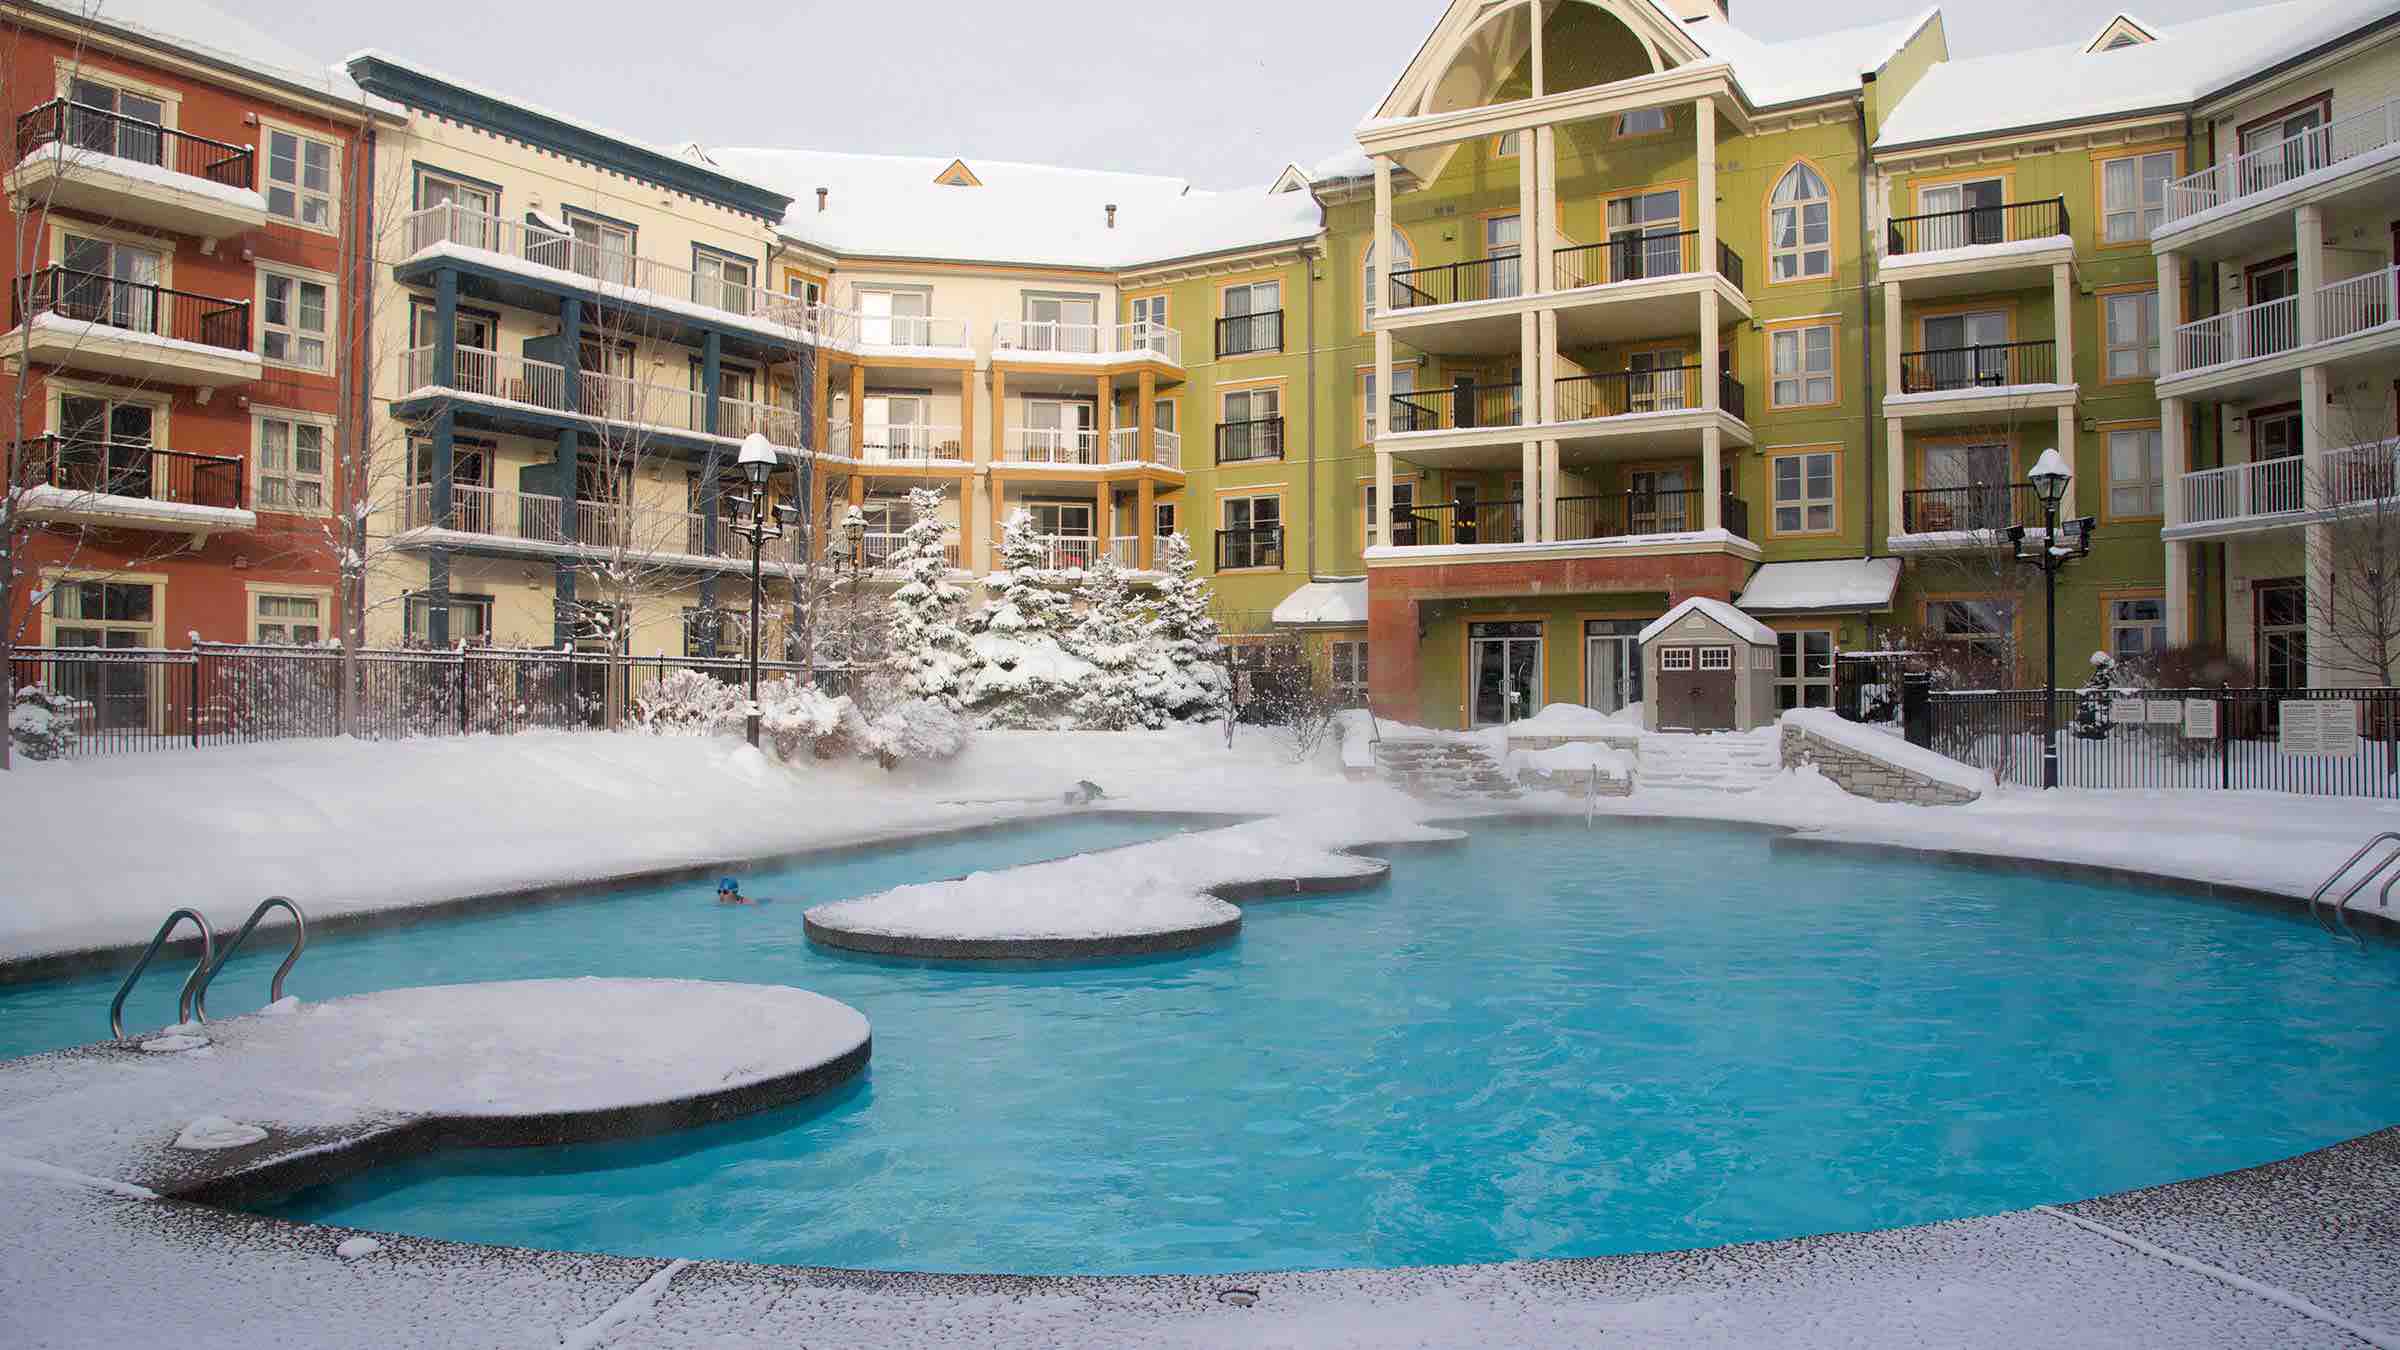 Mosaic hotel swimming pool in winter is one of the top hotels in blue mountains